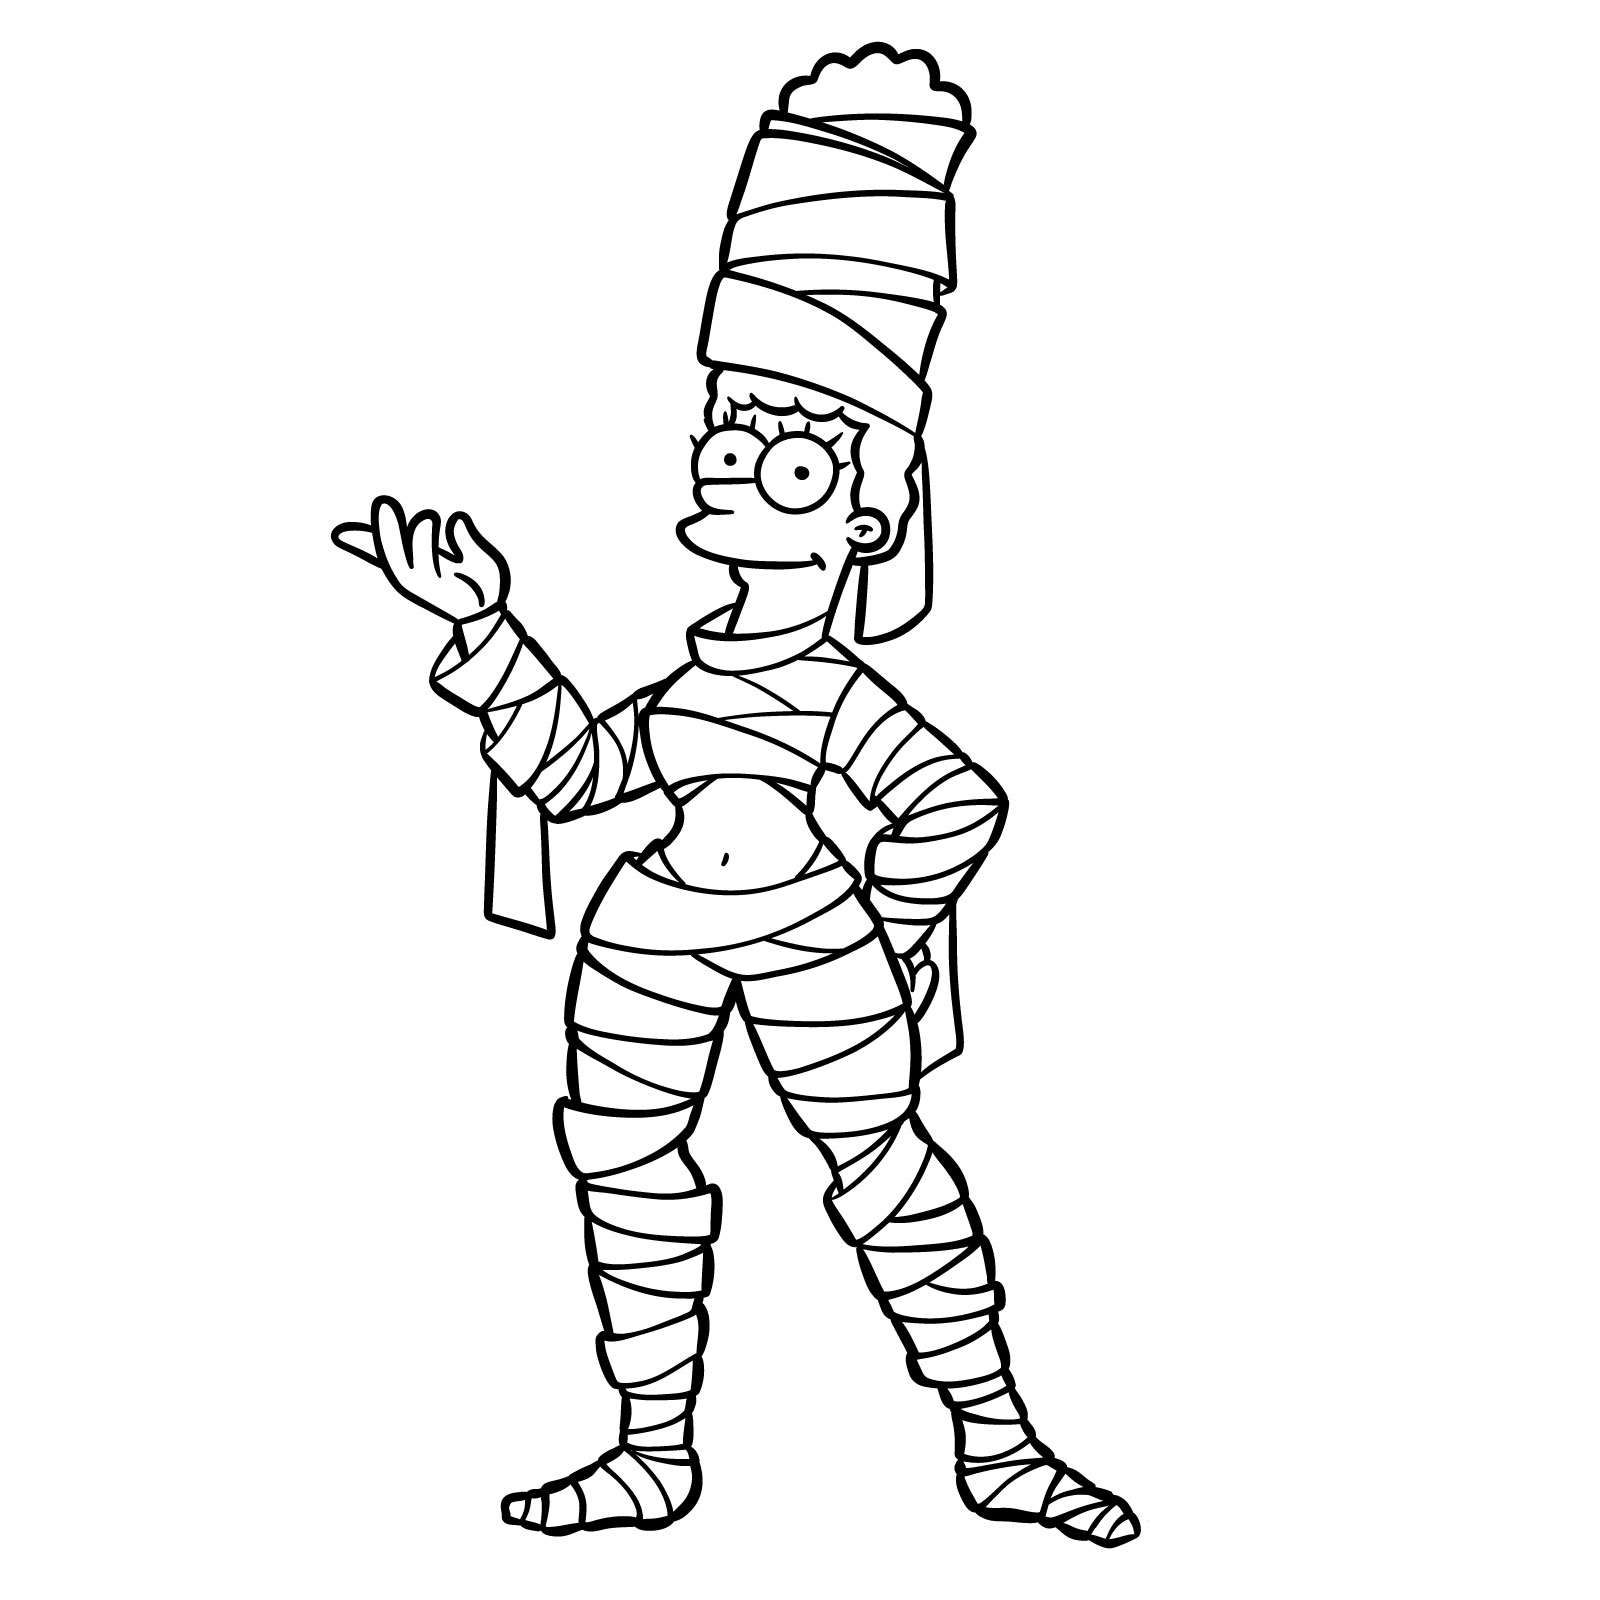 How to draw Marge as a mummy - final step